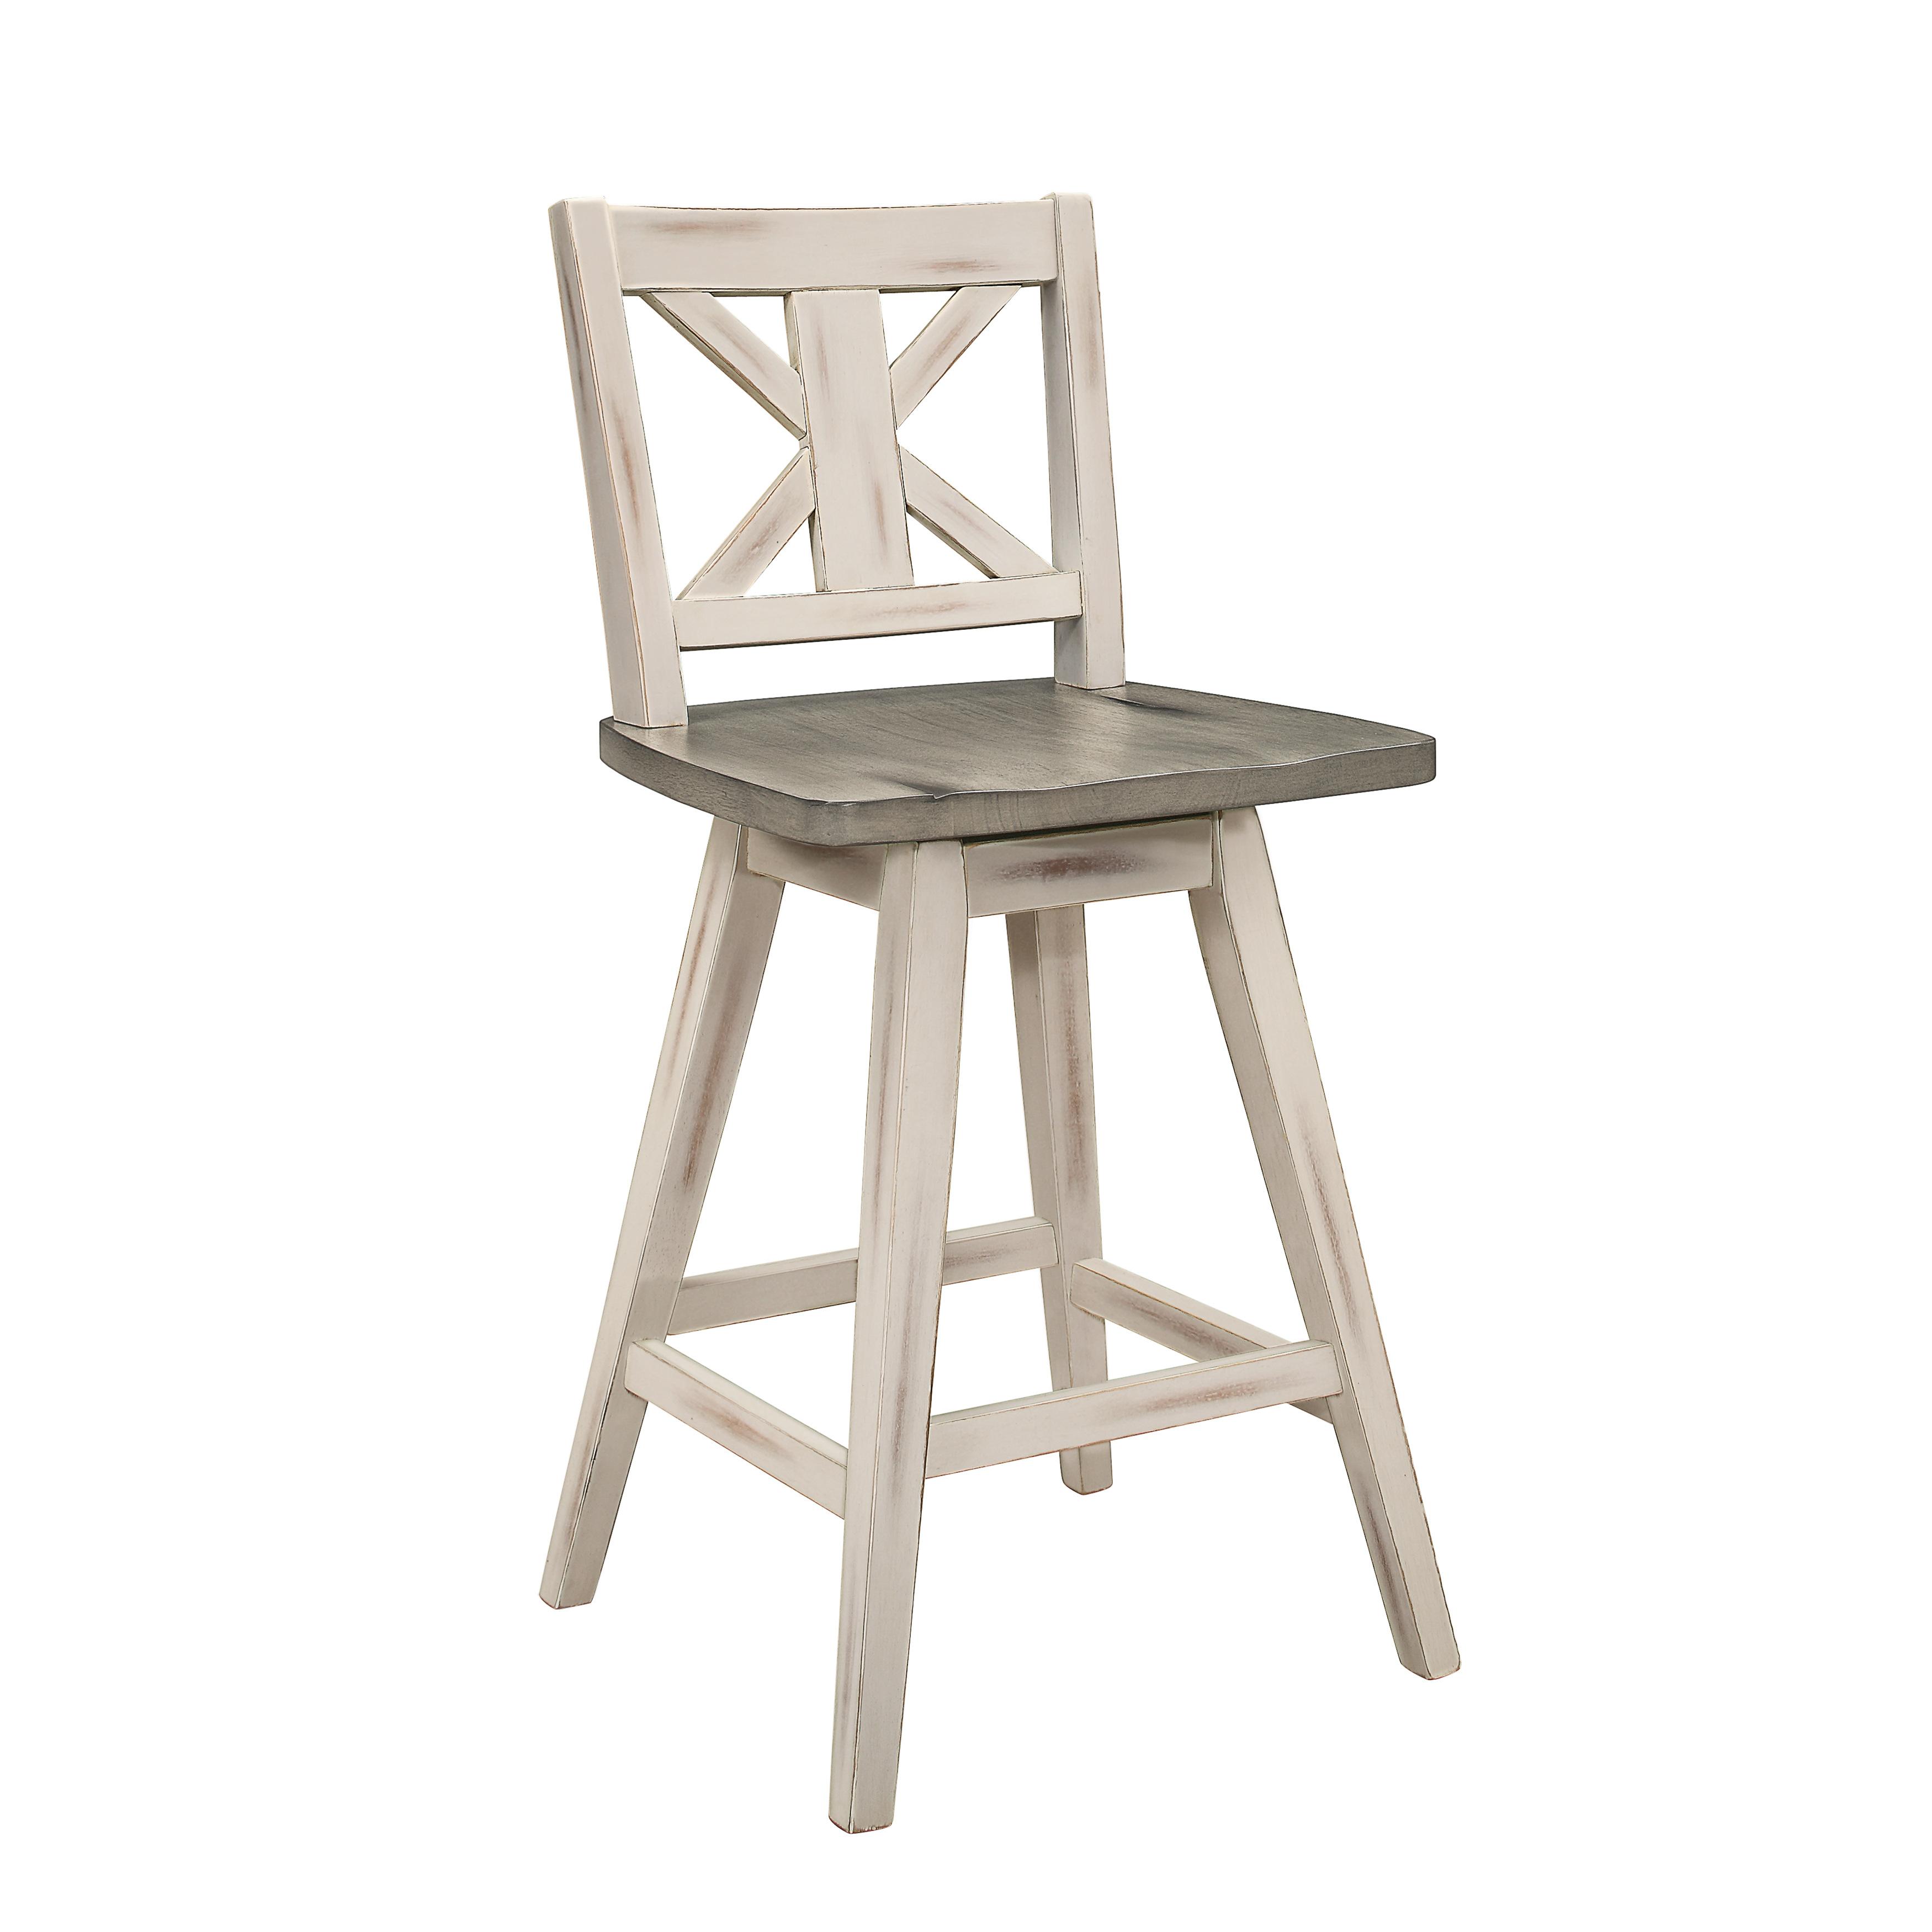 Rustic Counter Height Chair 5602-24WT Amsonia 5602-24WT in White, Gray 